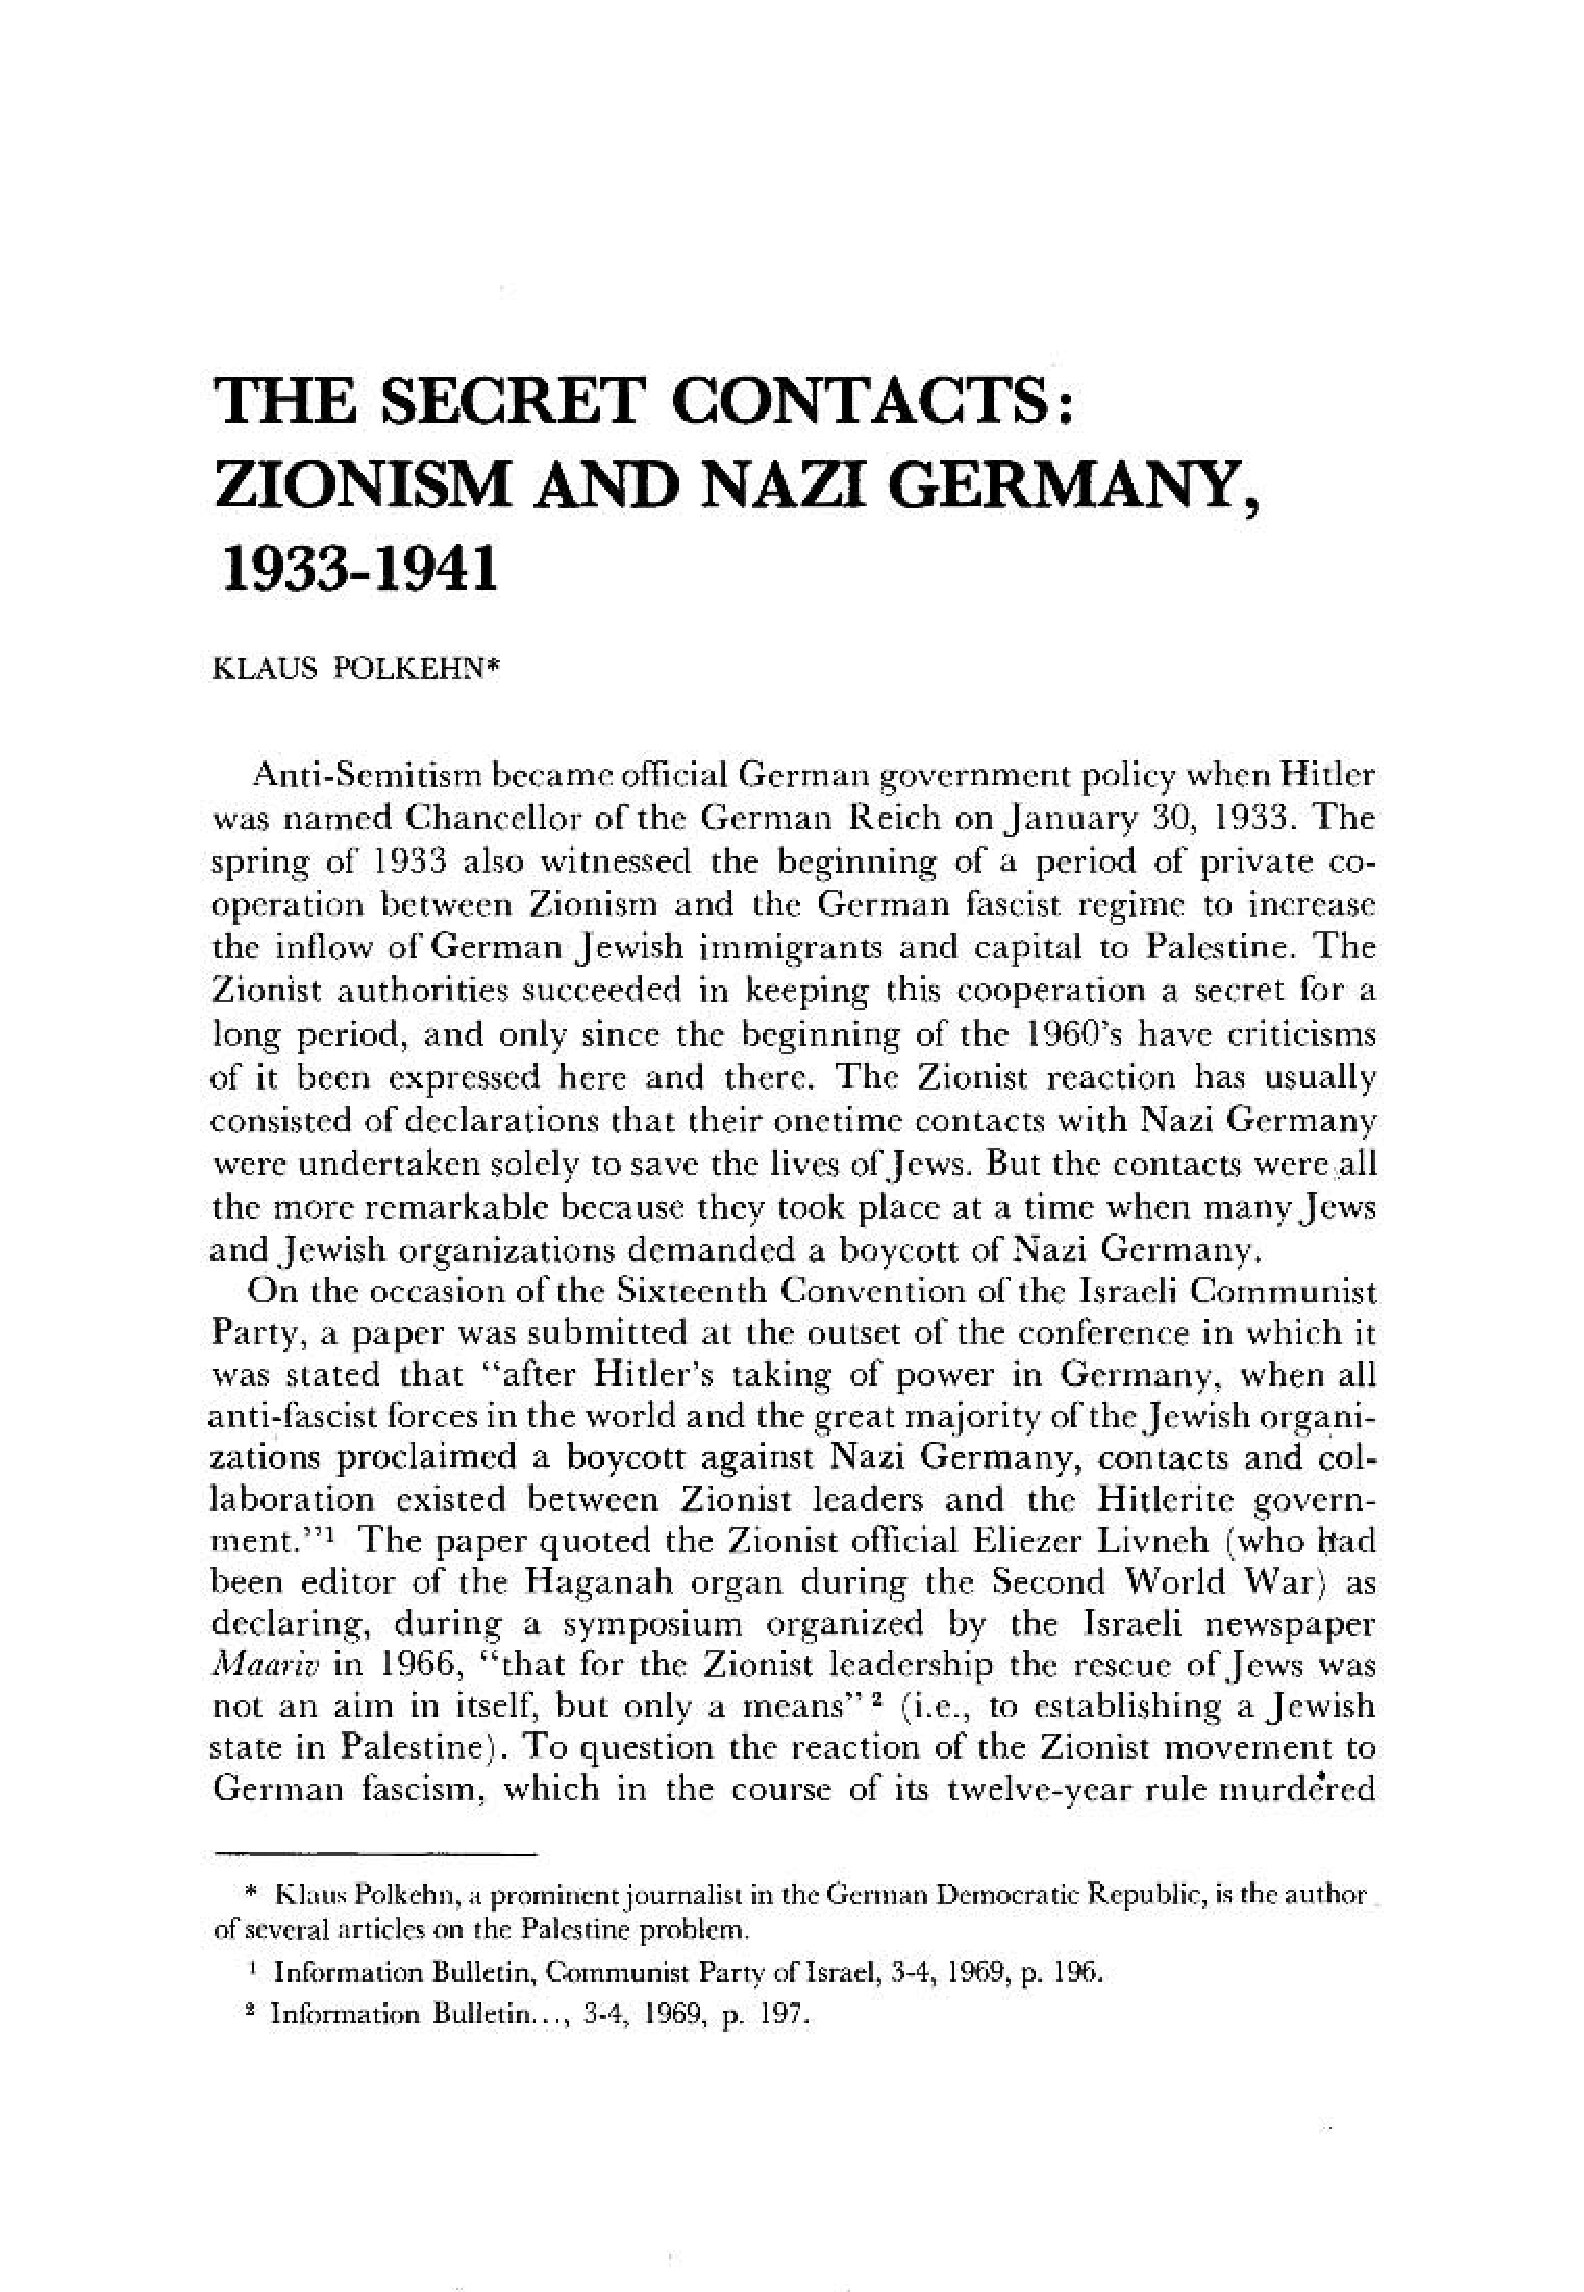 Polkehn, Klaus; The Secret Contacts - Zionism and Nazi Germany 1933-1941